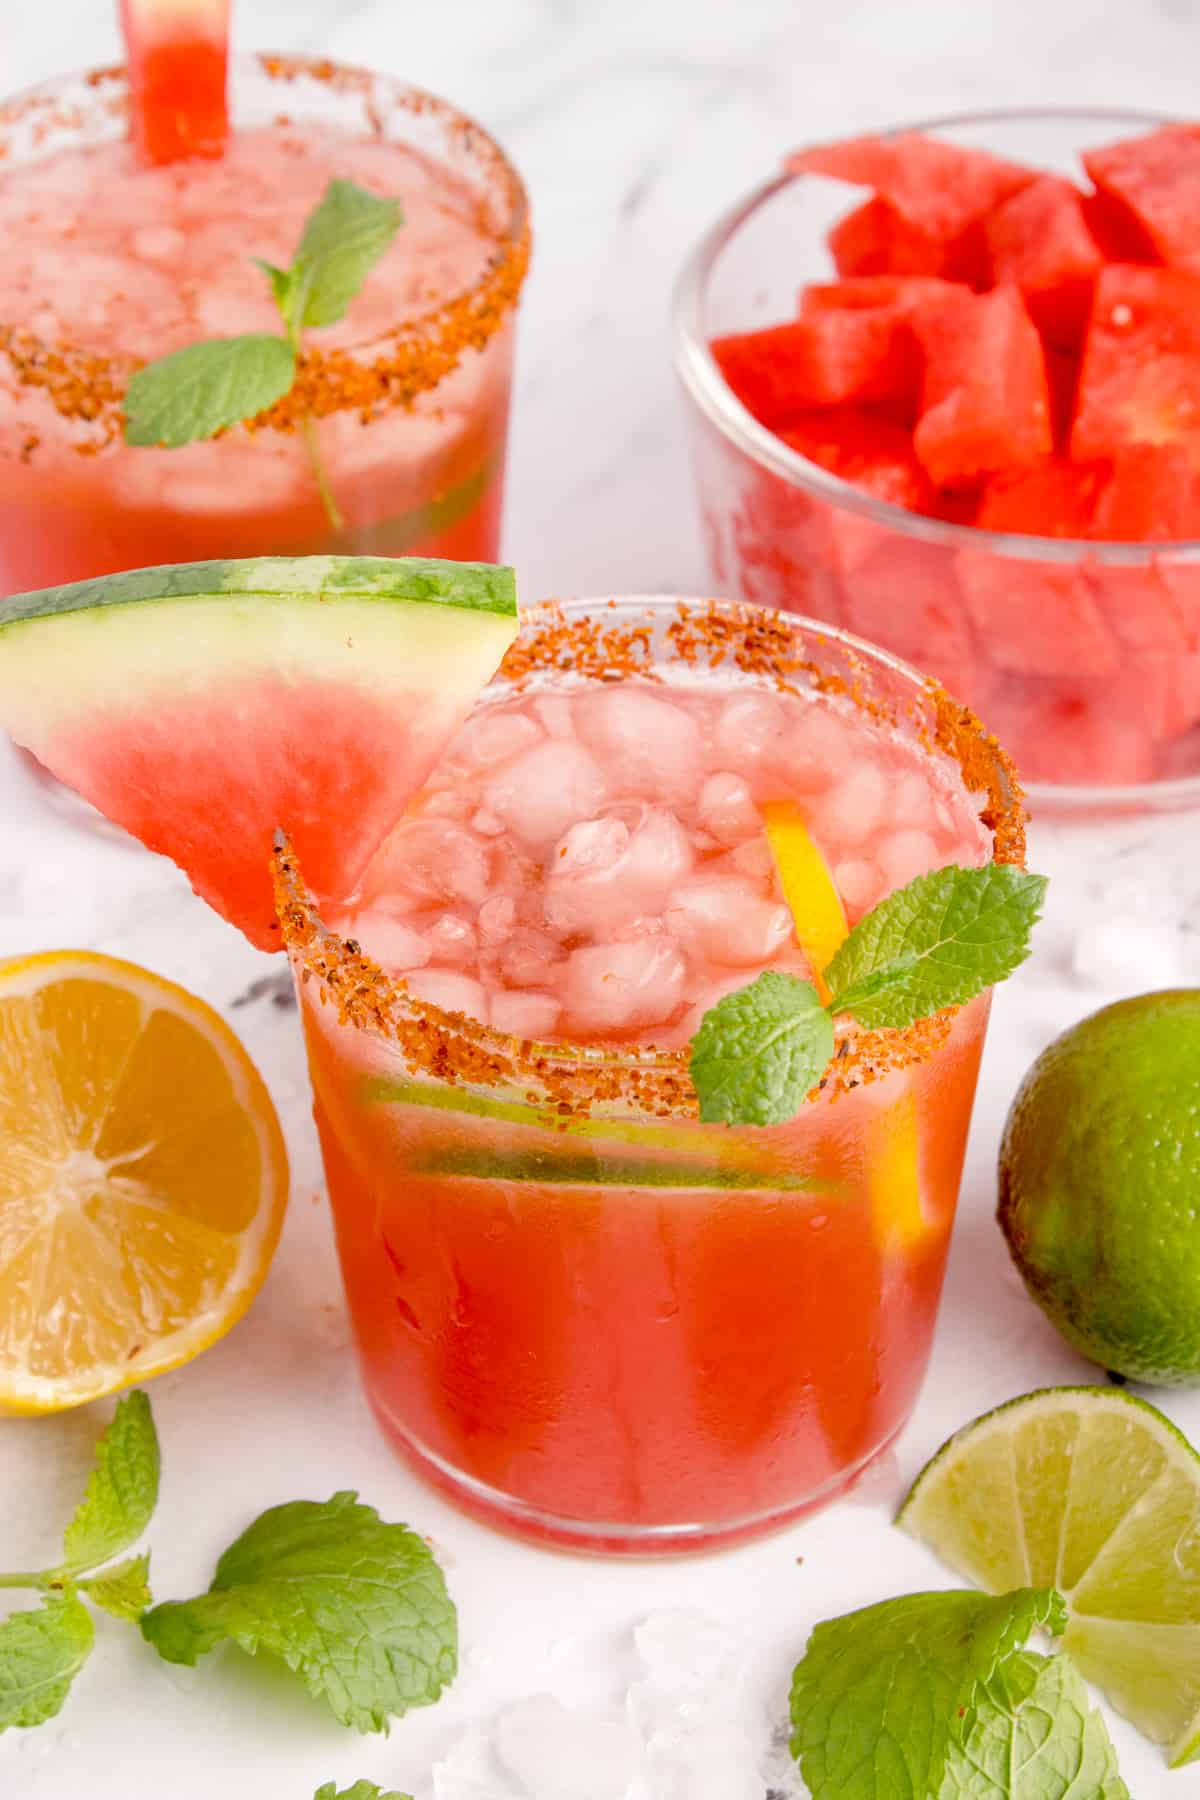 The image displays 2 glasses filled with refreshing watermelon kombucha. There is crushed ice in the glass, a lemon wedge, a watermelon wedge and mint leaves. The glass is rimmed with delicious Tajin. There is also a bowl with sliced watermelon in the background. The glass in the foreground is flanked by mint leaves and lemon and lime wedges. 